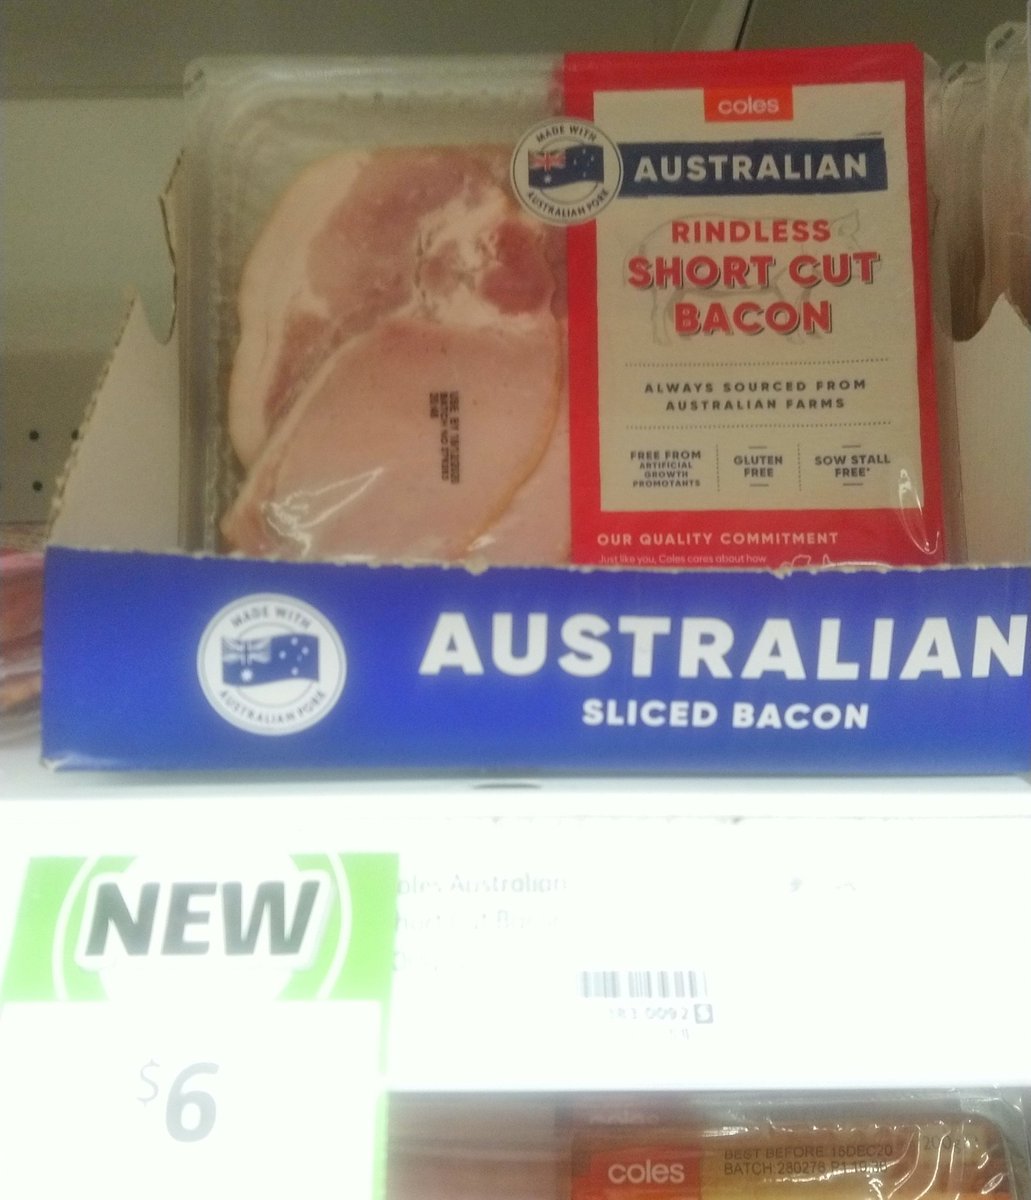 NEW!

Happy #AustraliaDay! 🇦🇺 

WE win again, this time with BACON 🥓! 

WE won by checking & rejecting foreign mystery meat. 

WE win OUR NATION back by checking & replacing ALP/LNP globalism parties with Australian loyalists.

#BeAustralian
#BuyAustralian
#VoteAustralian
🙏